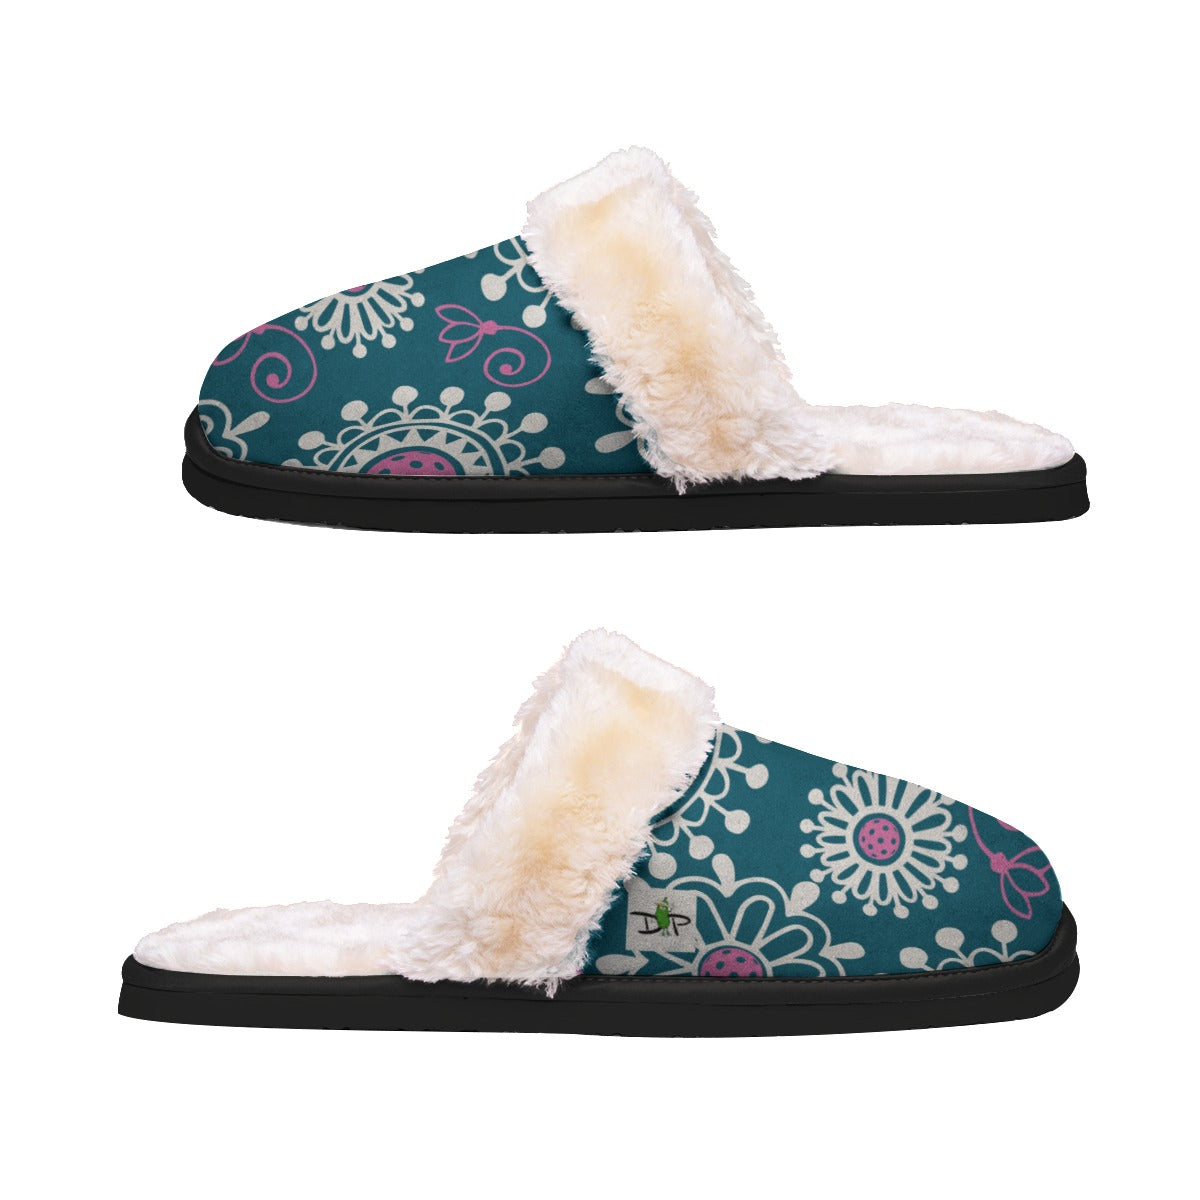 Coming Up Daisies - Peacock/Pink - Women's Pickleball Plush Slippers by Dizzy Pickle